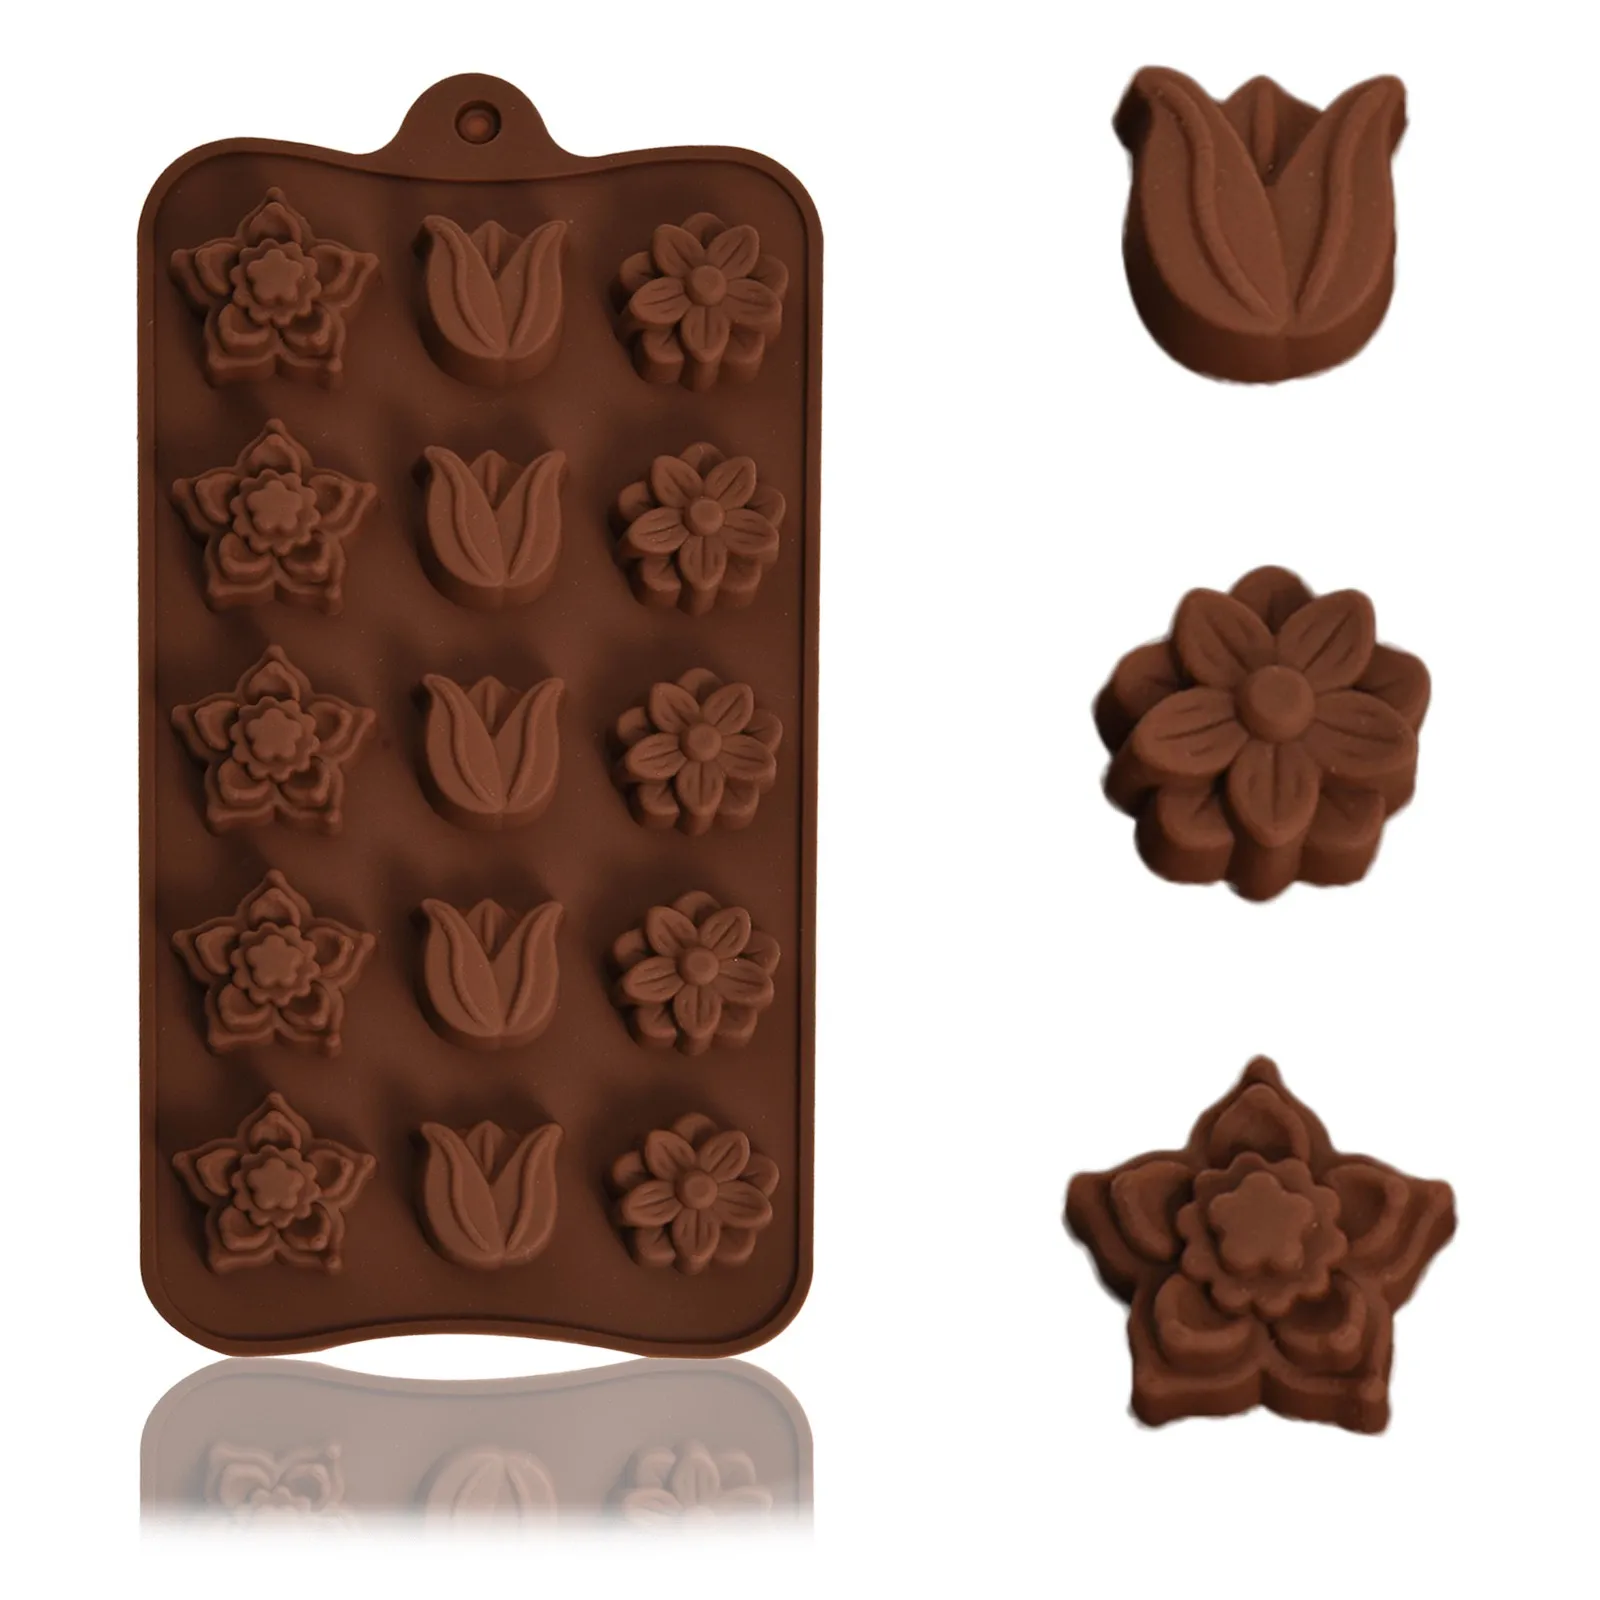 https://ae01.alicdn.com/kf/Ha4e4c020f1e84932a37e20e7f9c2fad37/Silicone-Mold-Chocolate-flower-Candy-Molds-Silicone-Baking-Molds-for-Cake-Fancy-Shapes-Non-stick-Kitchen.jpg